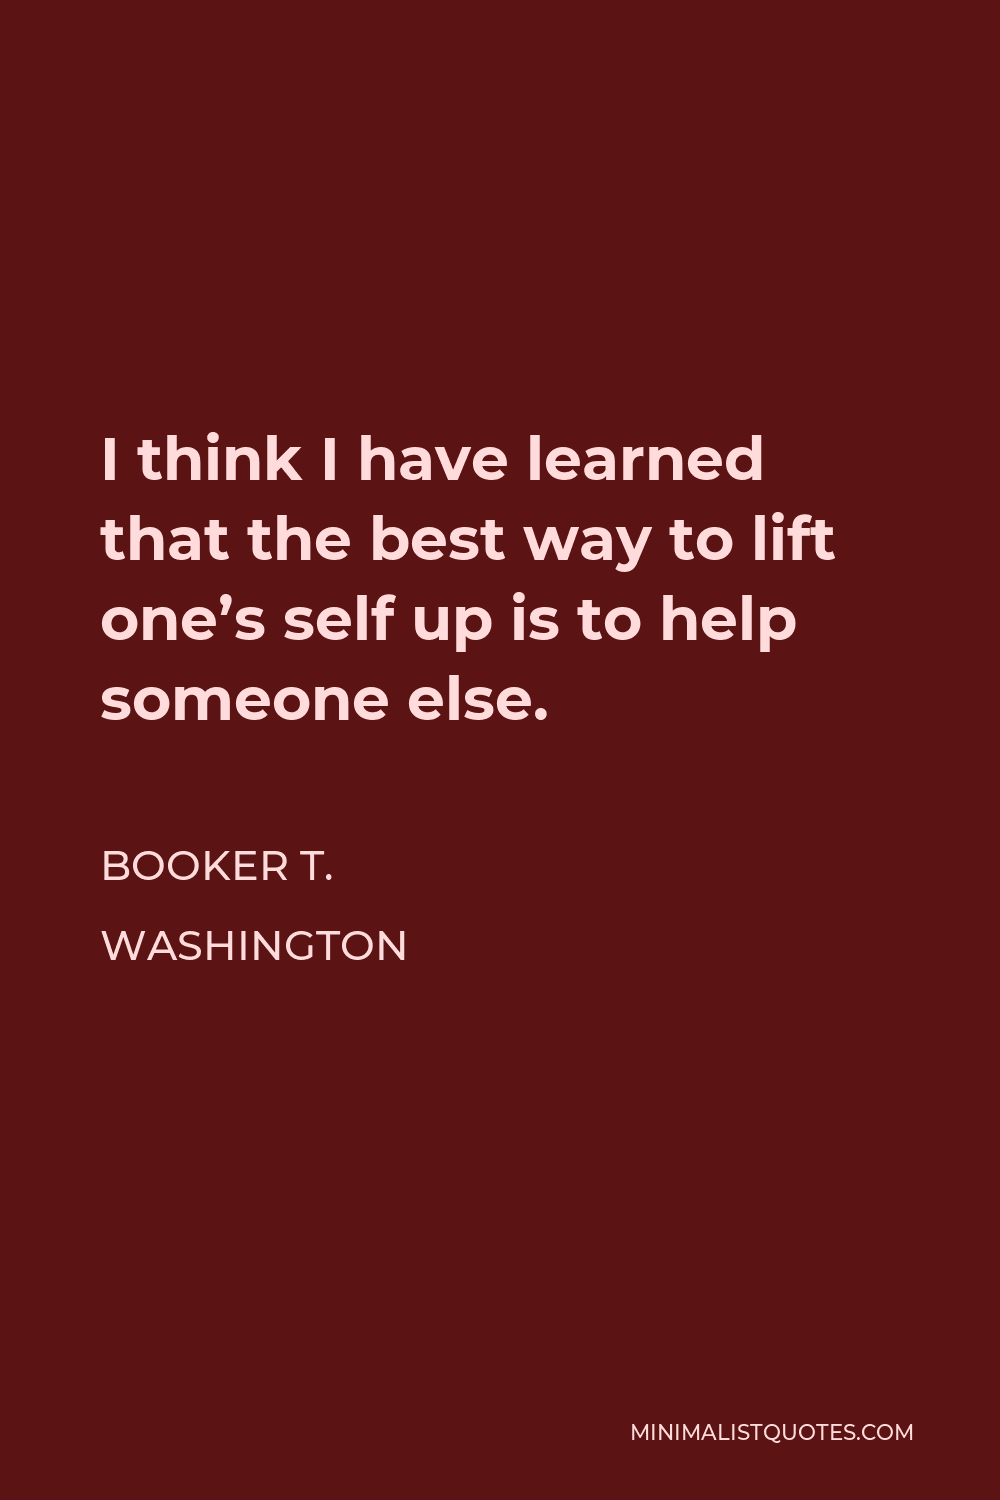 Booker T. Washington Quote - I think I have learned that the best way to lift one’s self up is to help someone else.